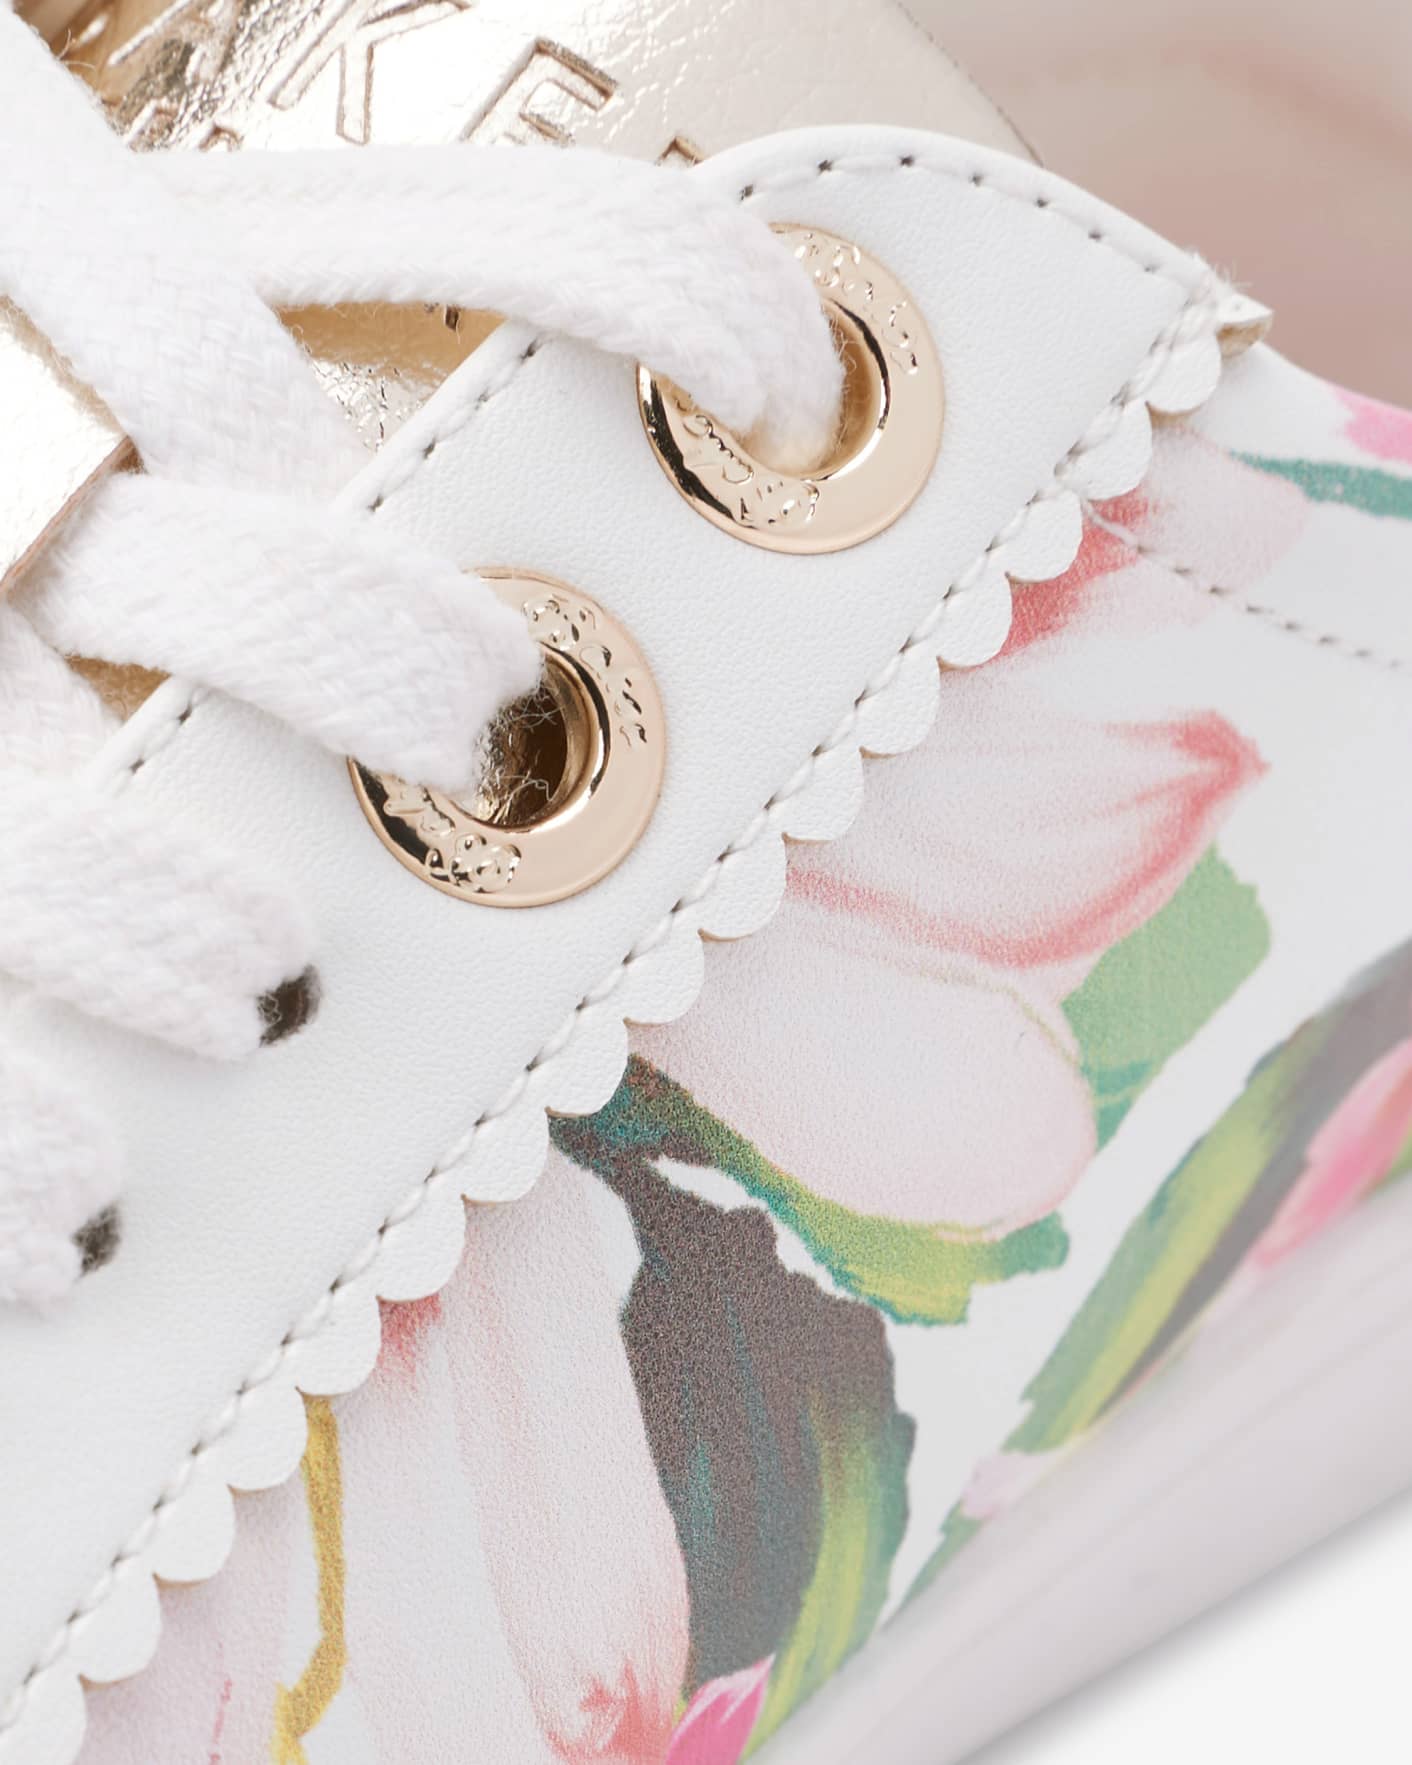 White Floral Printed Lace Up Trainer Ted Baker